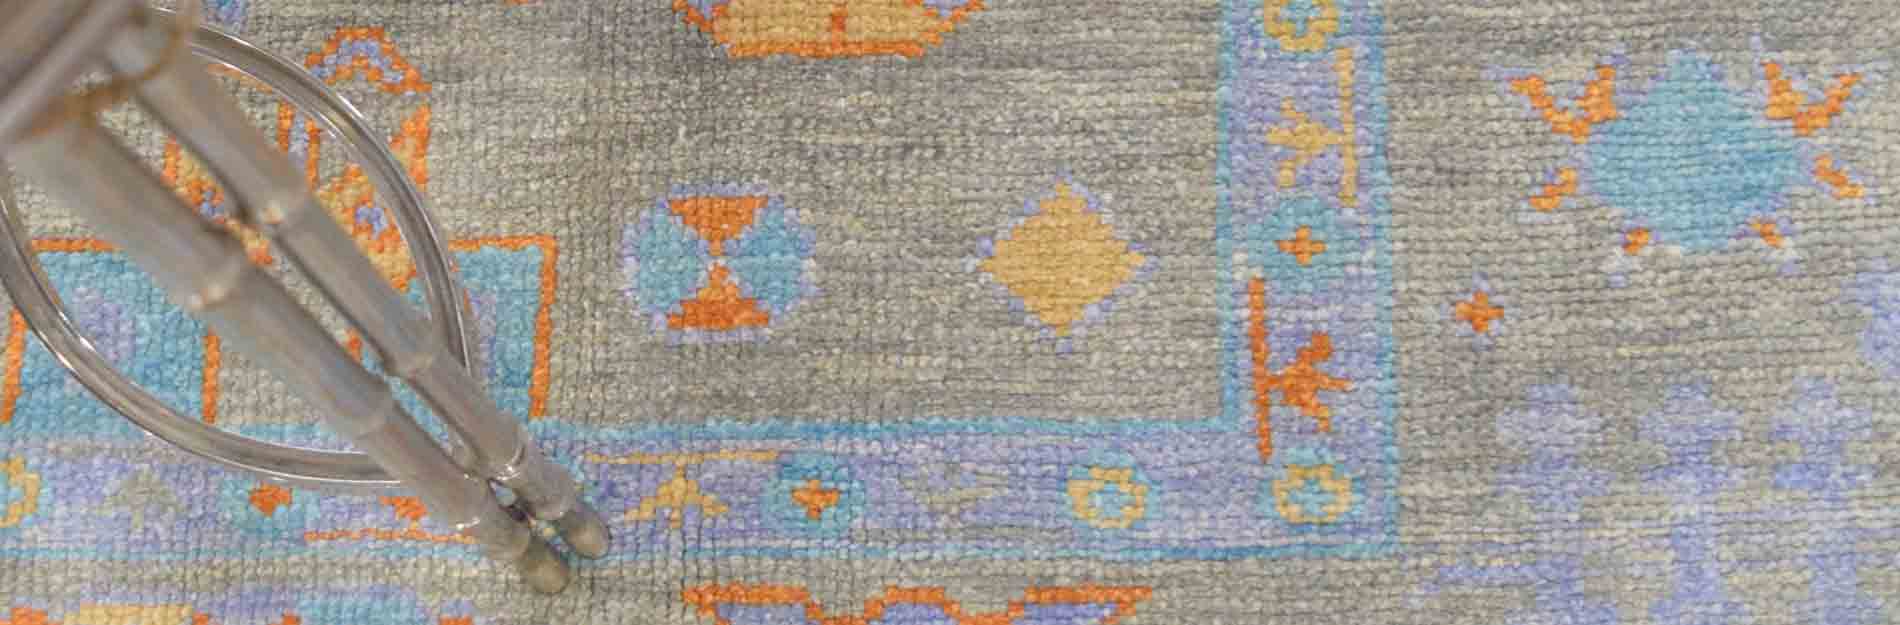 Exclusive Indian Rugs Sale Online